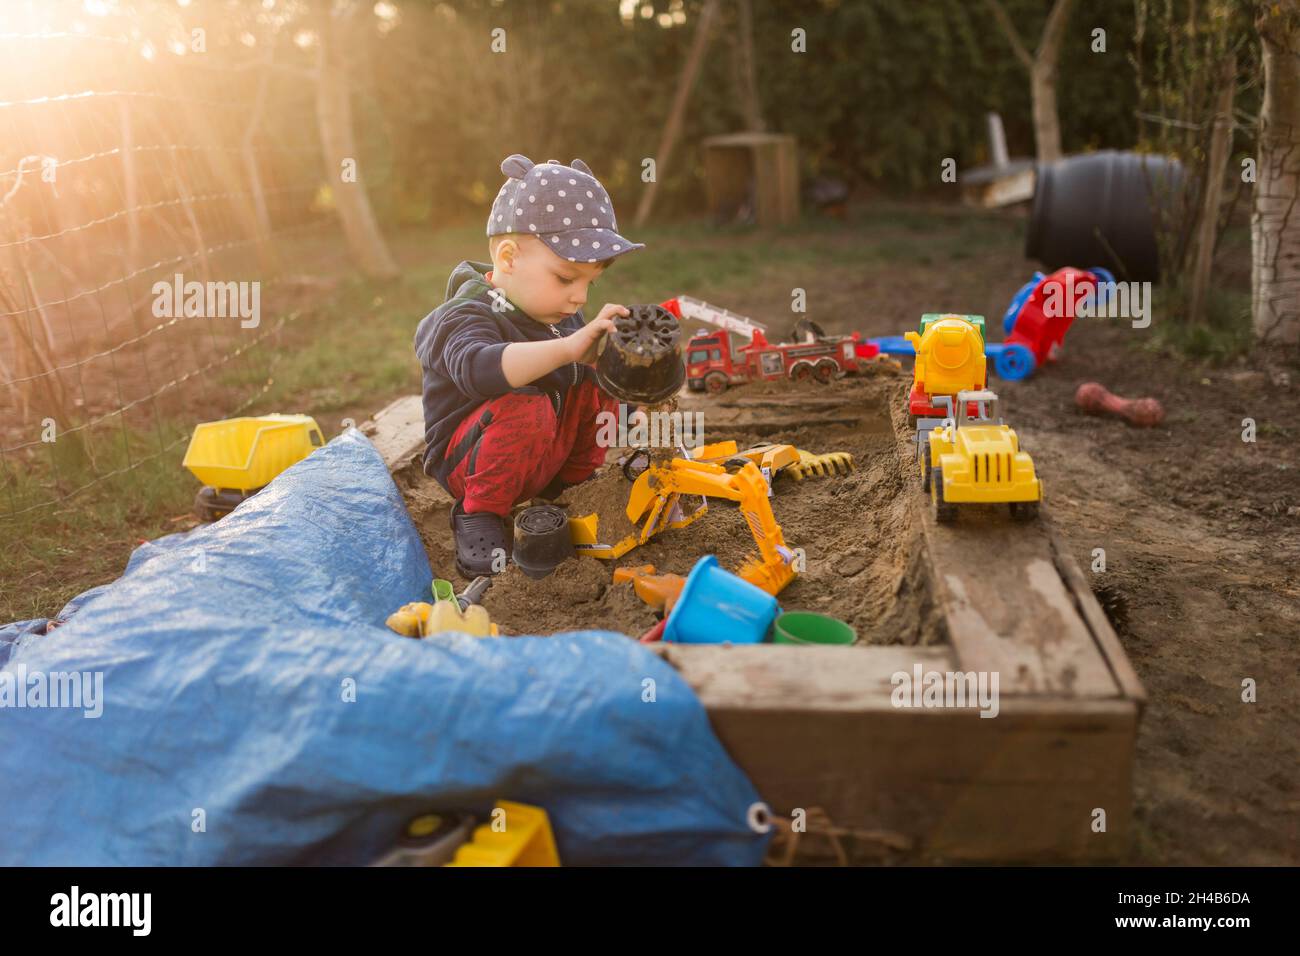 Small boy surrounded by toys squat in sandpit and playing with s Stock Photo